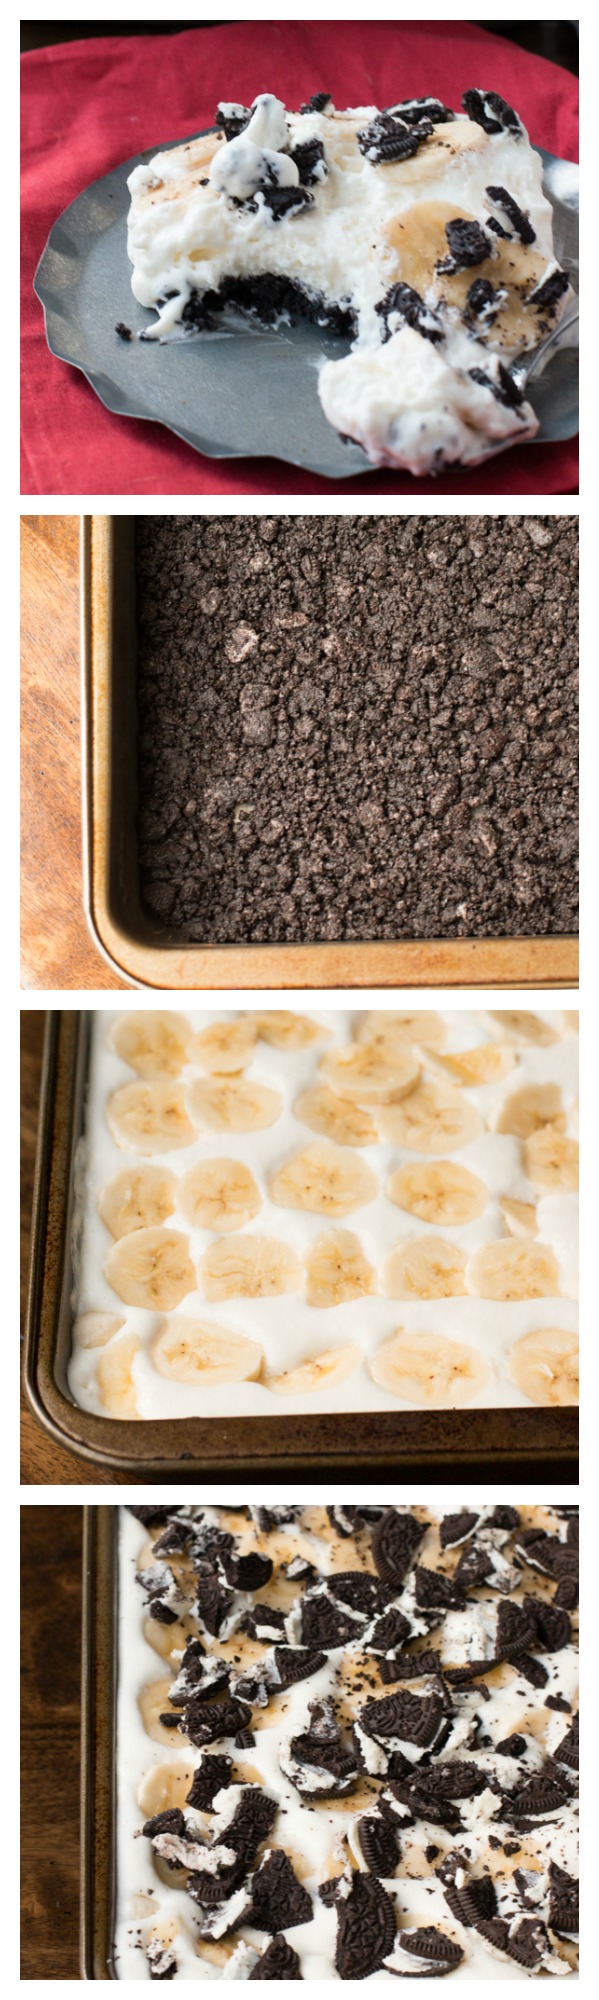 Oreo Cake with Bananas from Oh, Sweet Basil on chef-in-training.com …This cake is so easy and so delicious!